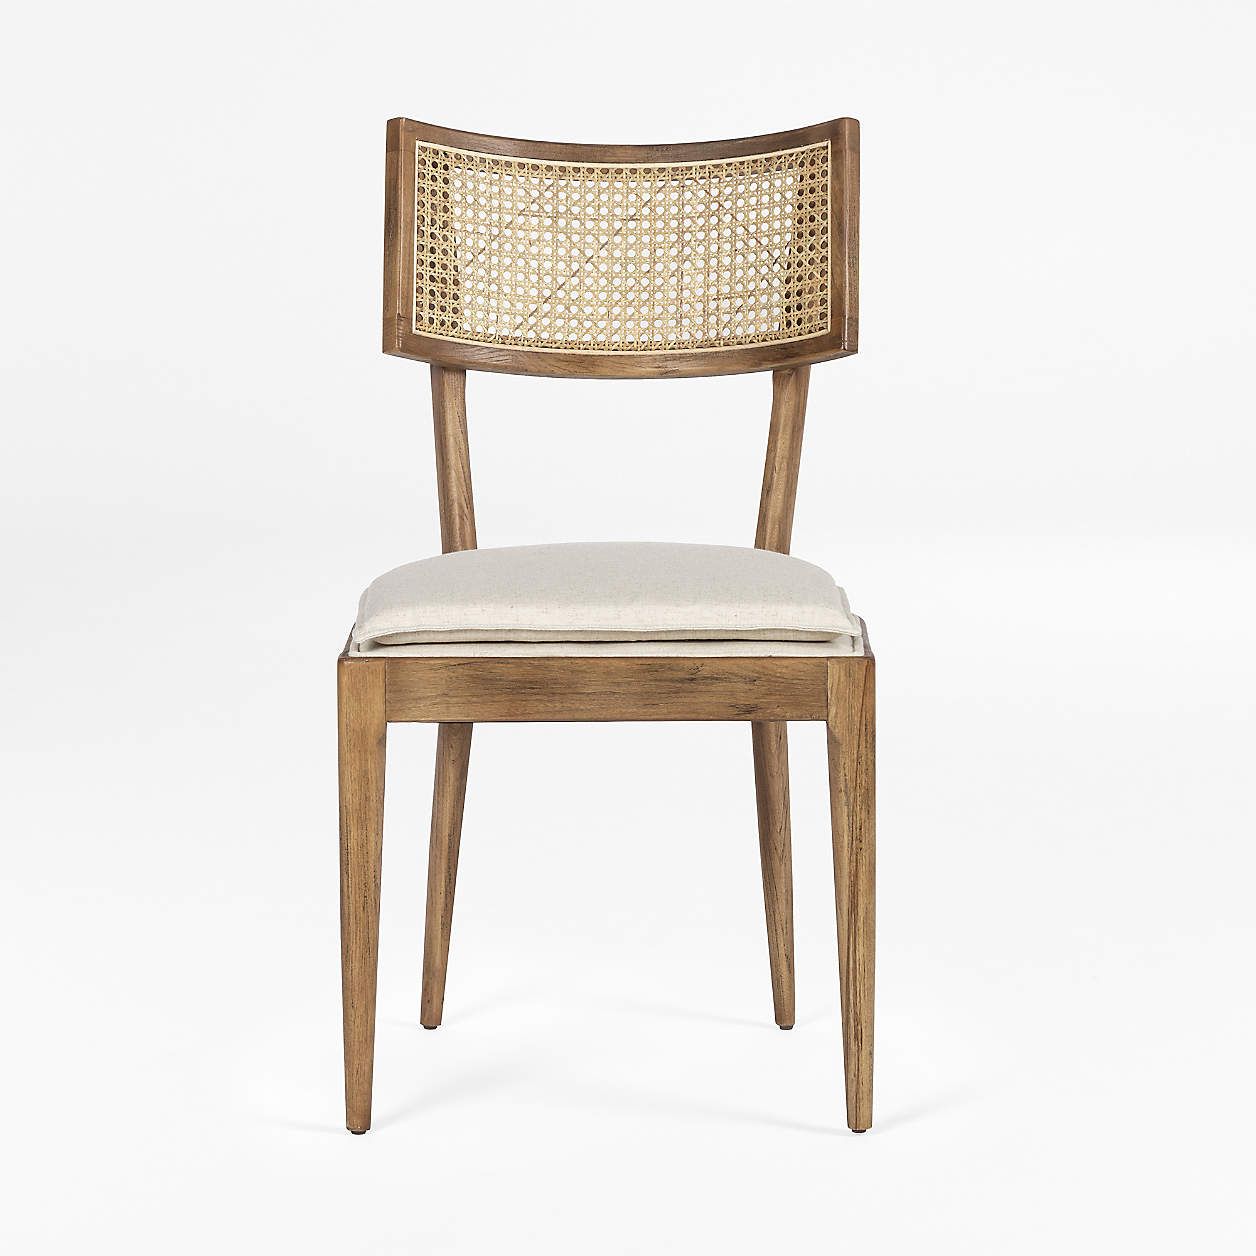 Libby Cane Dining Chair + Reviews | Crate and Barrel | Crate & Barrel